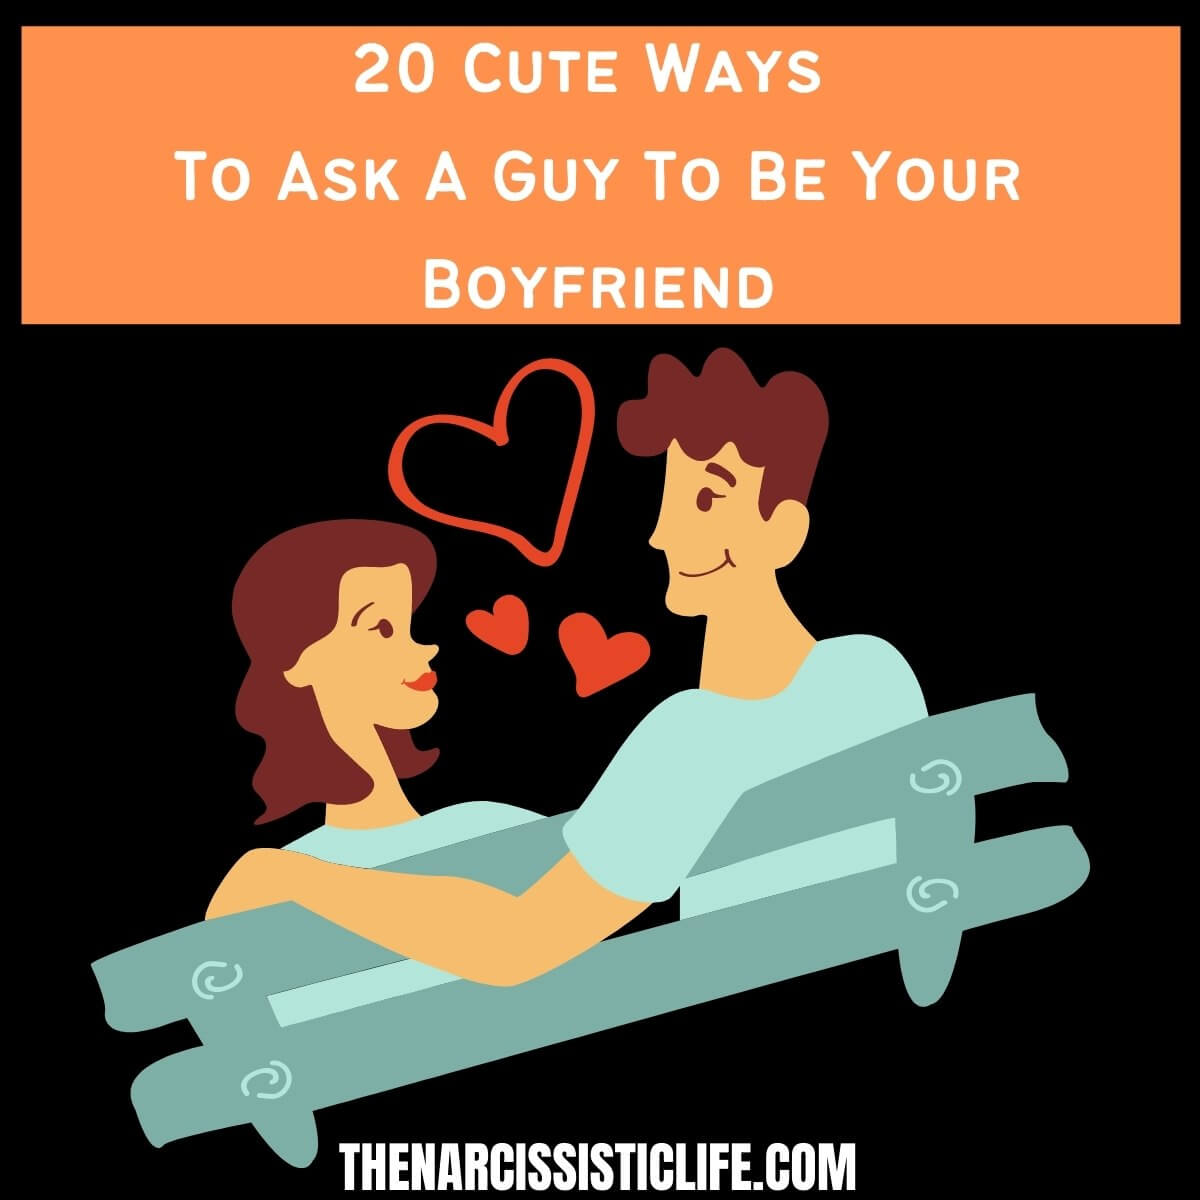 20 Cute Ways To Ask A Guy To Be Your Boyfriend